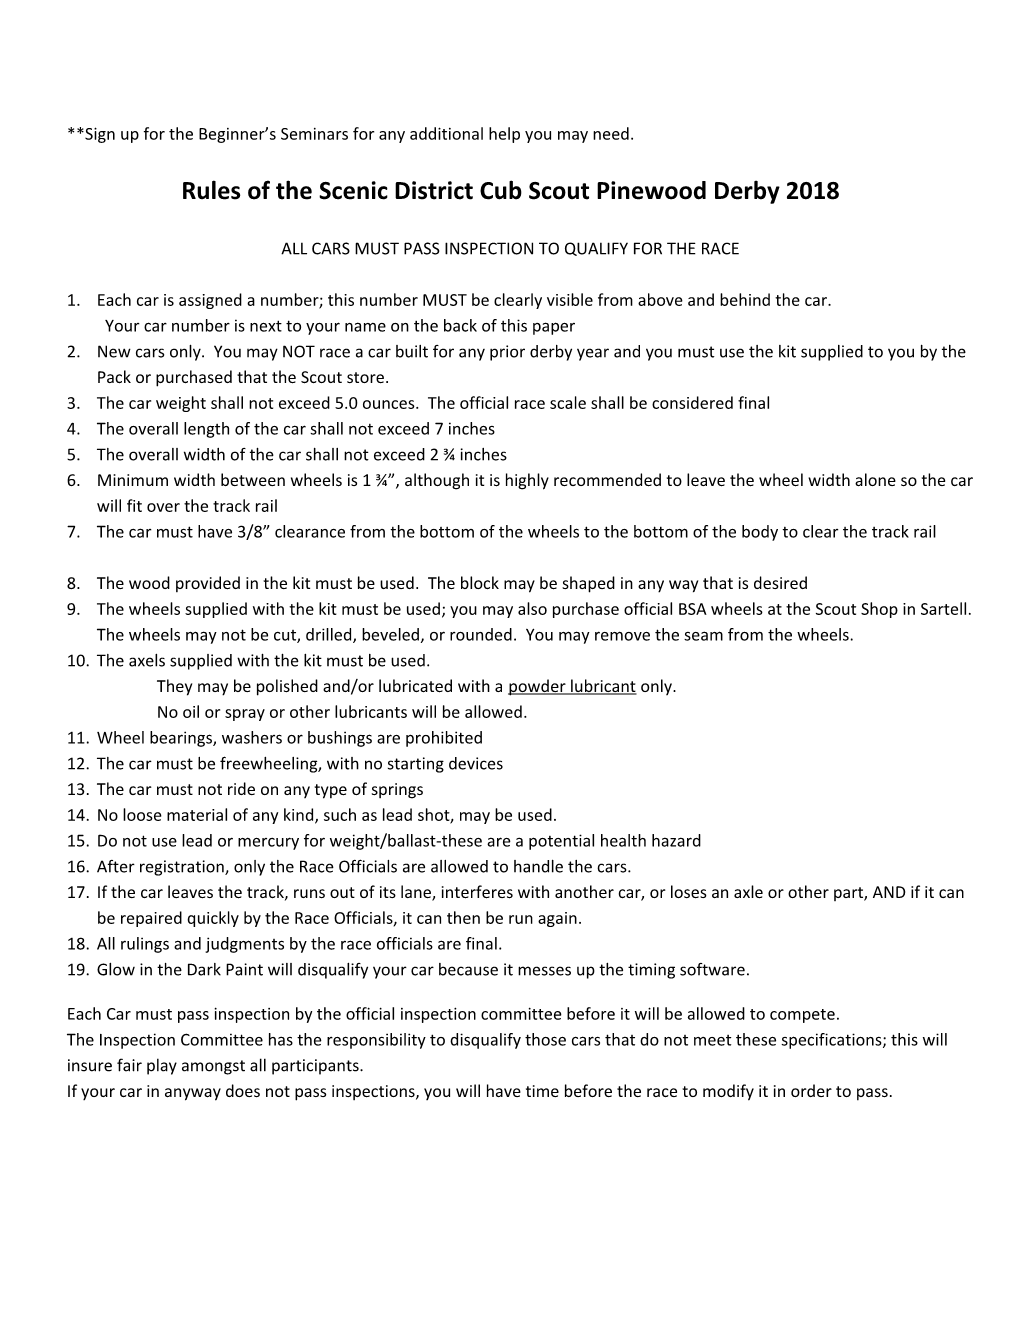 Rules of the Scenic District Cub Scout Pinewood Derby 2018